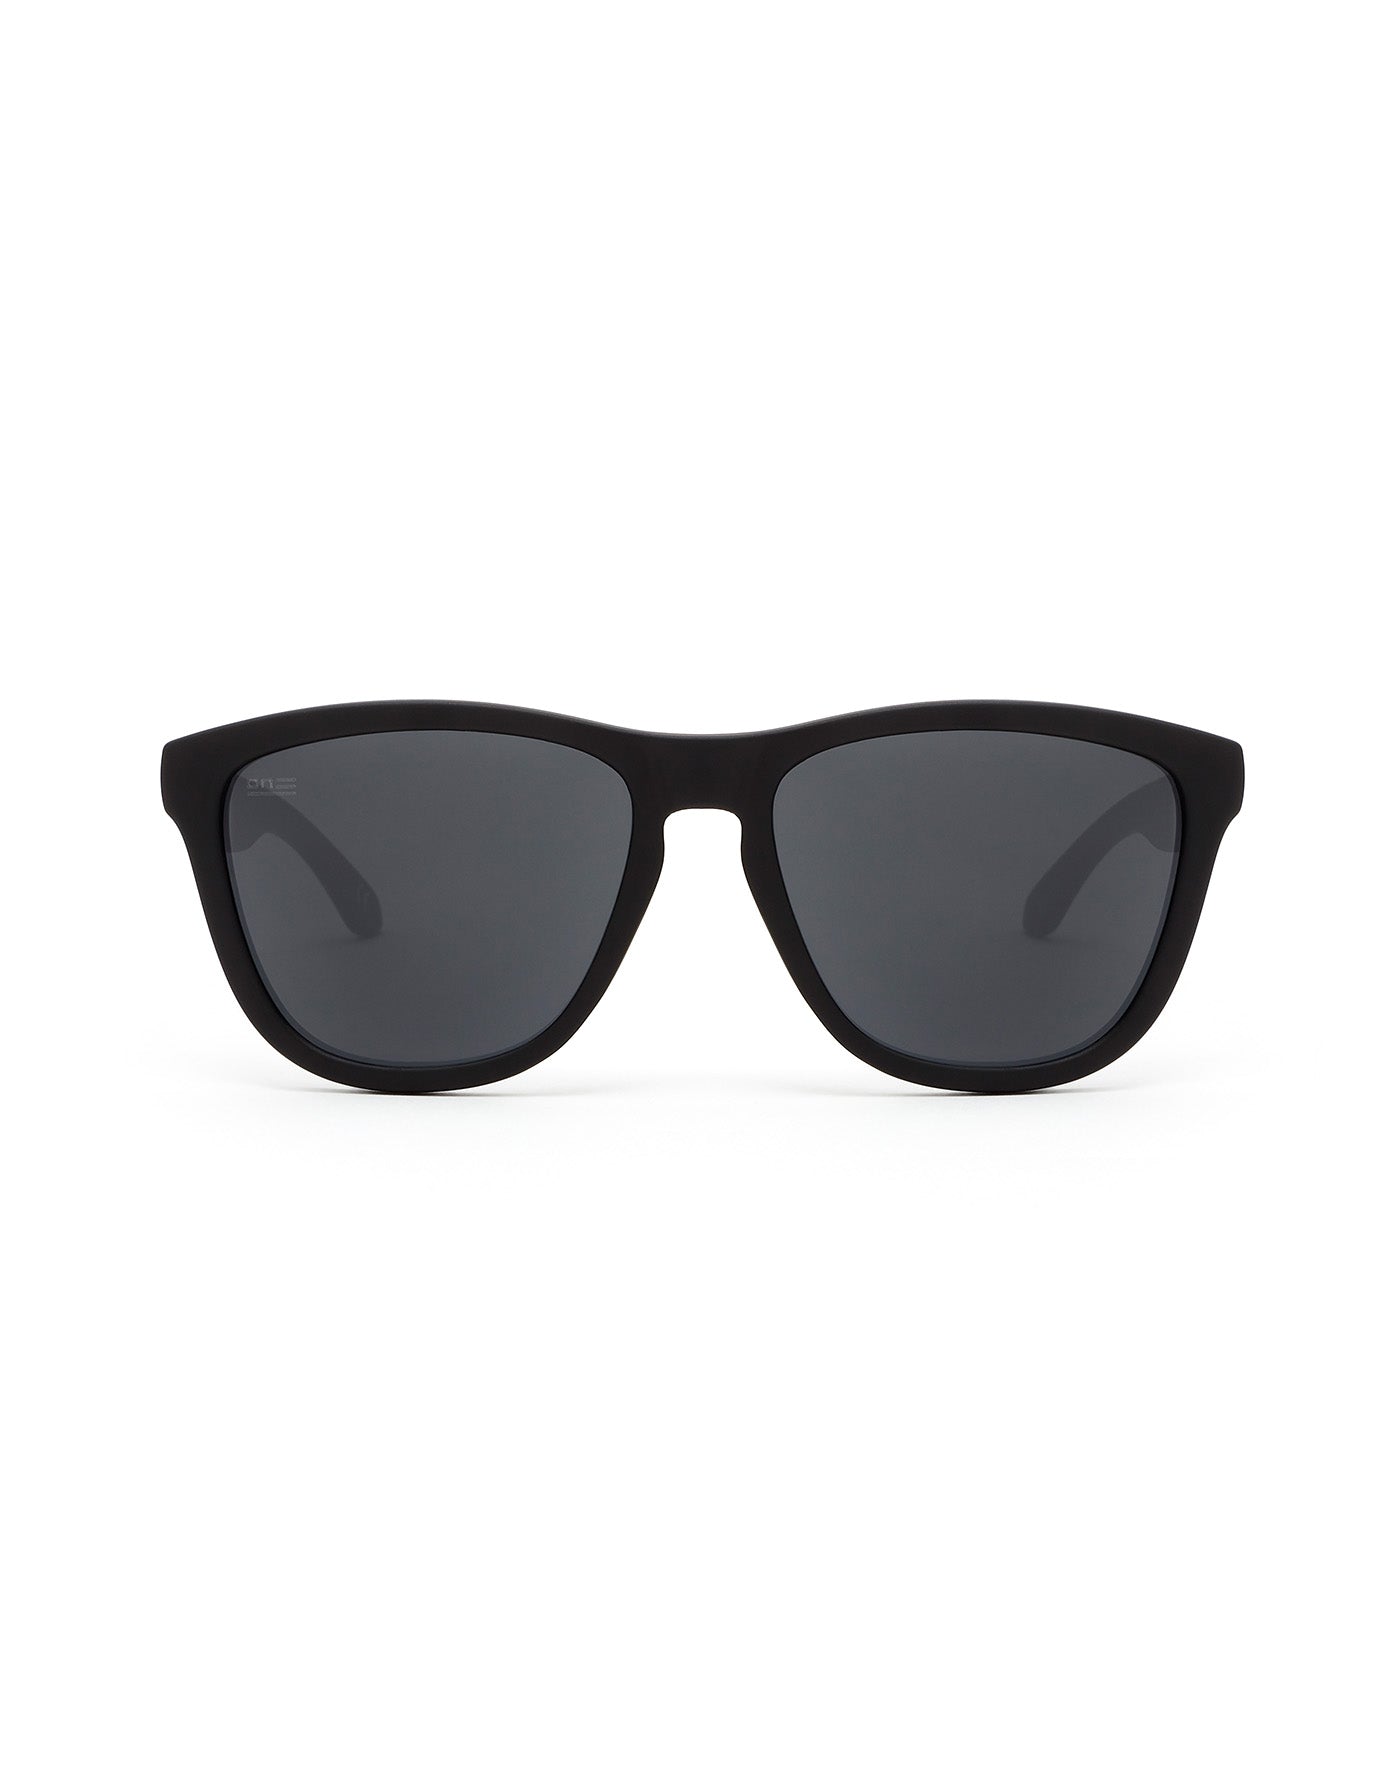 HAWKERS - ONE Carbon Black Dark For Men and Women UV400